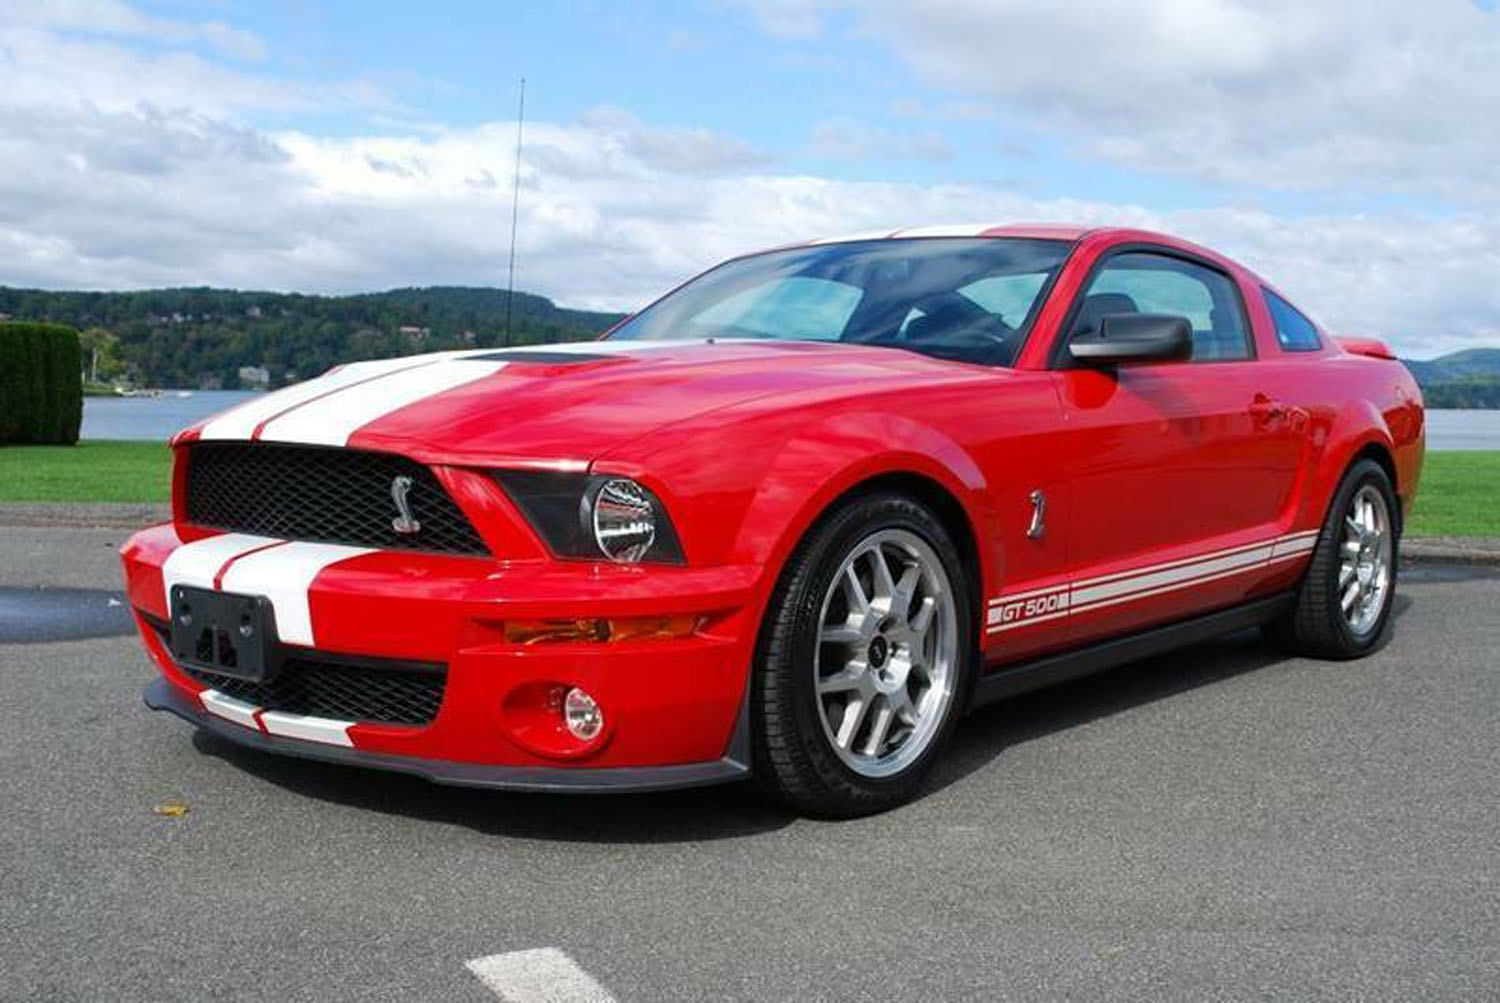 2007 Shelby Gt500 Movie Car From I Am Legend For Sale